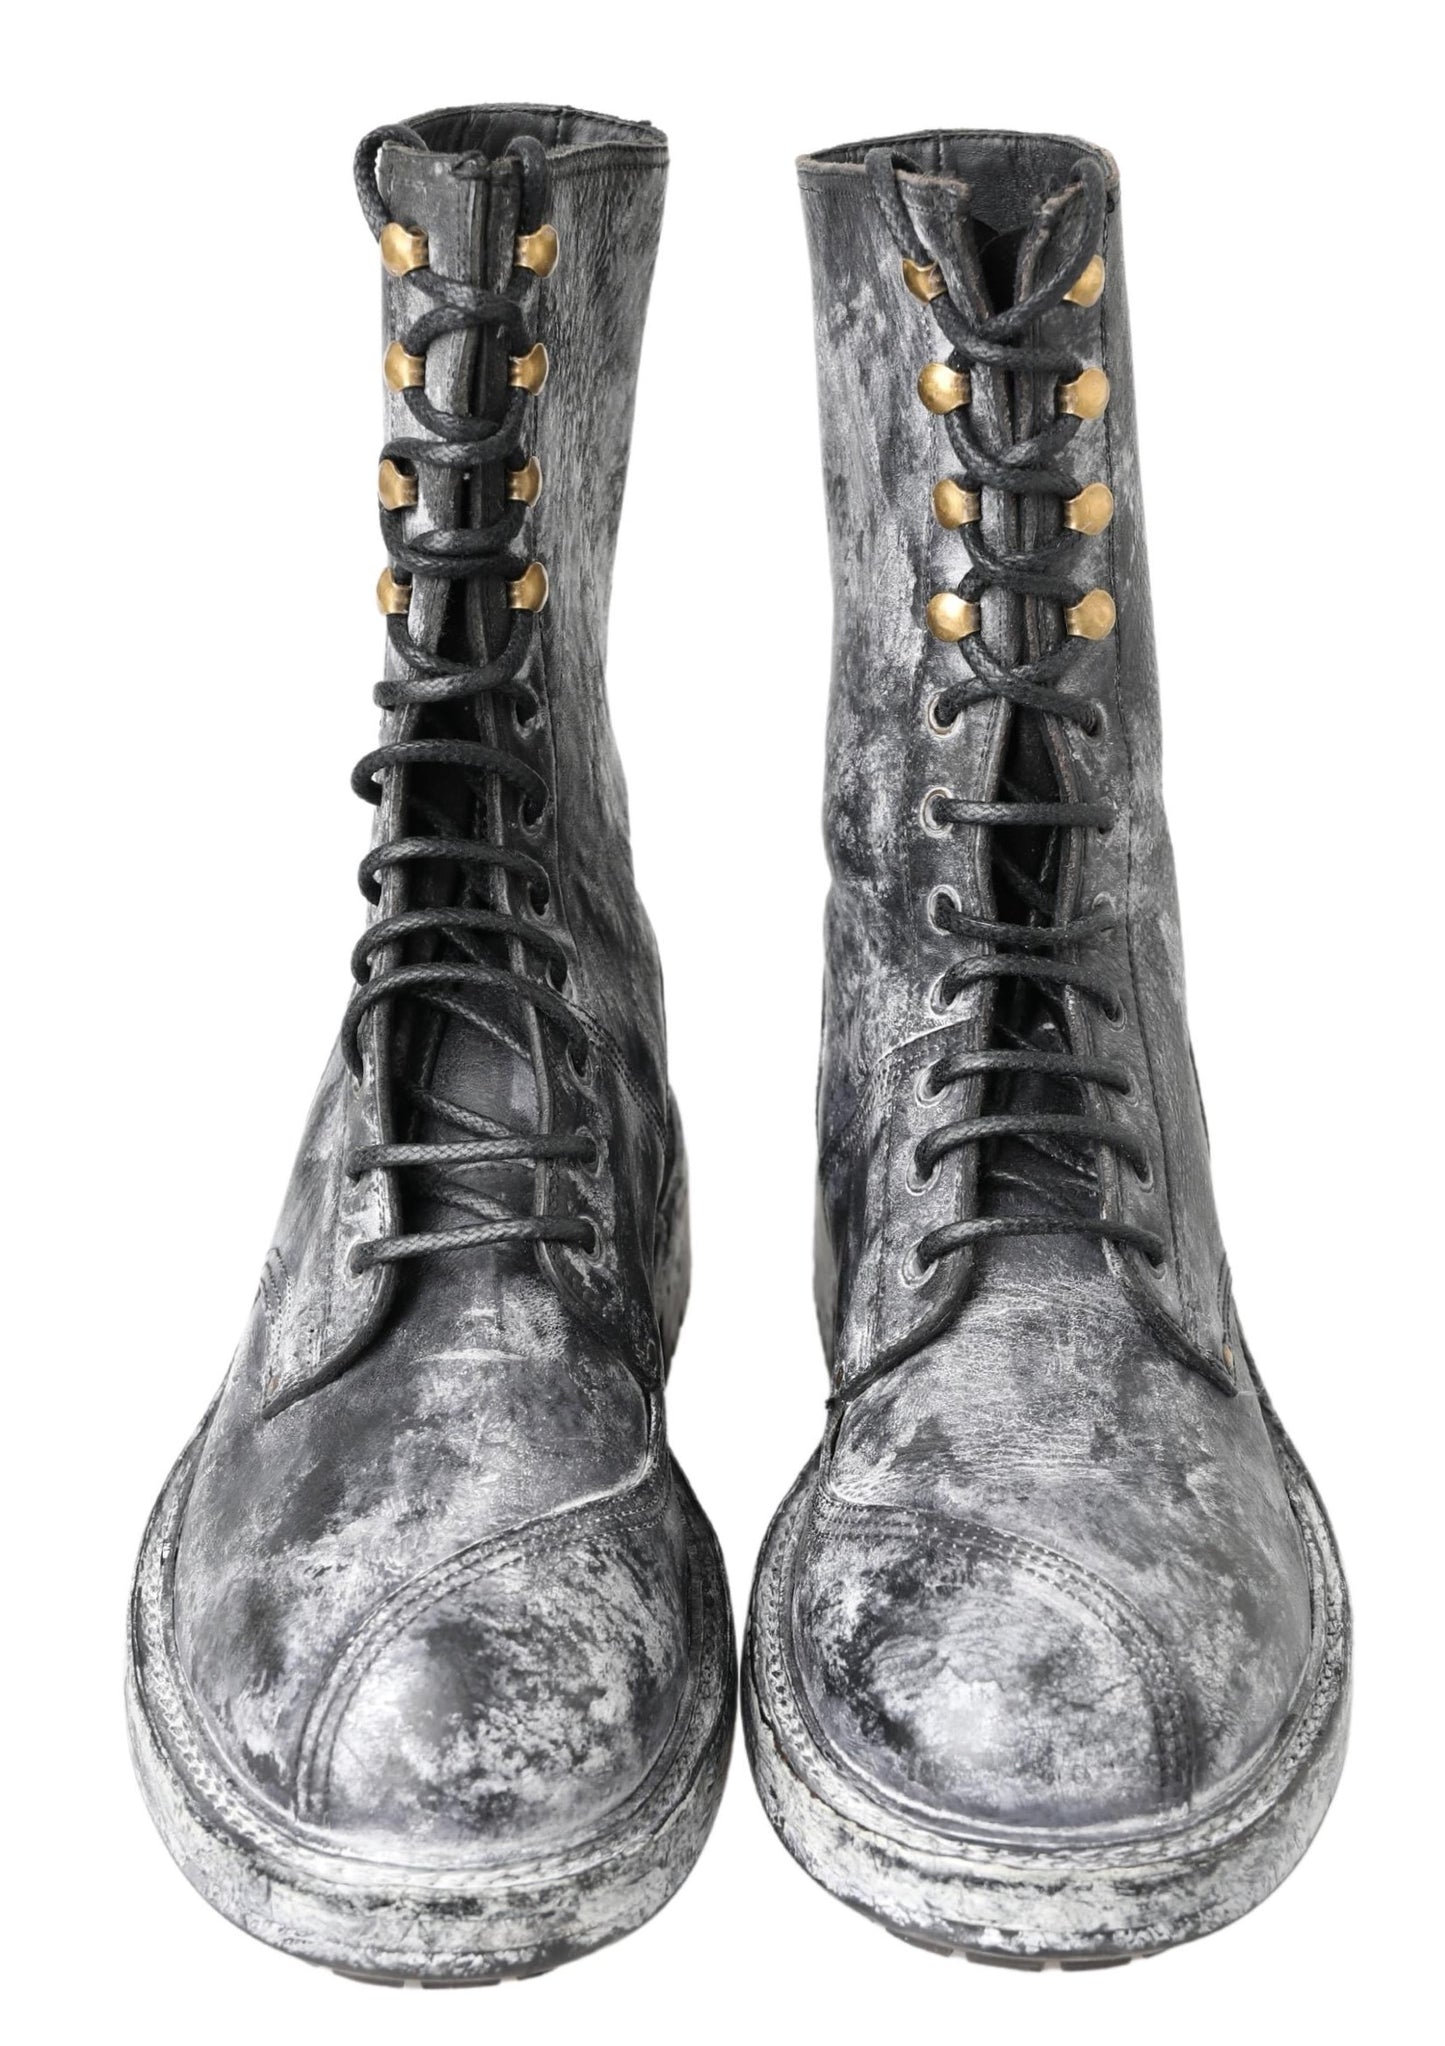 Dolce & Gabbana Chic Black Lace-Up Boots with Gray White Fade